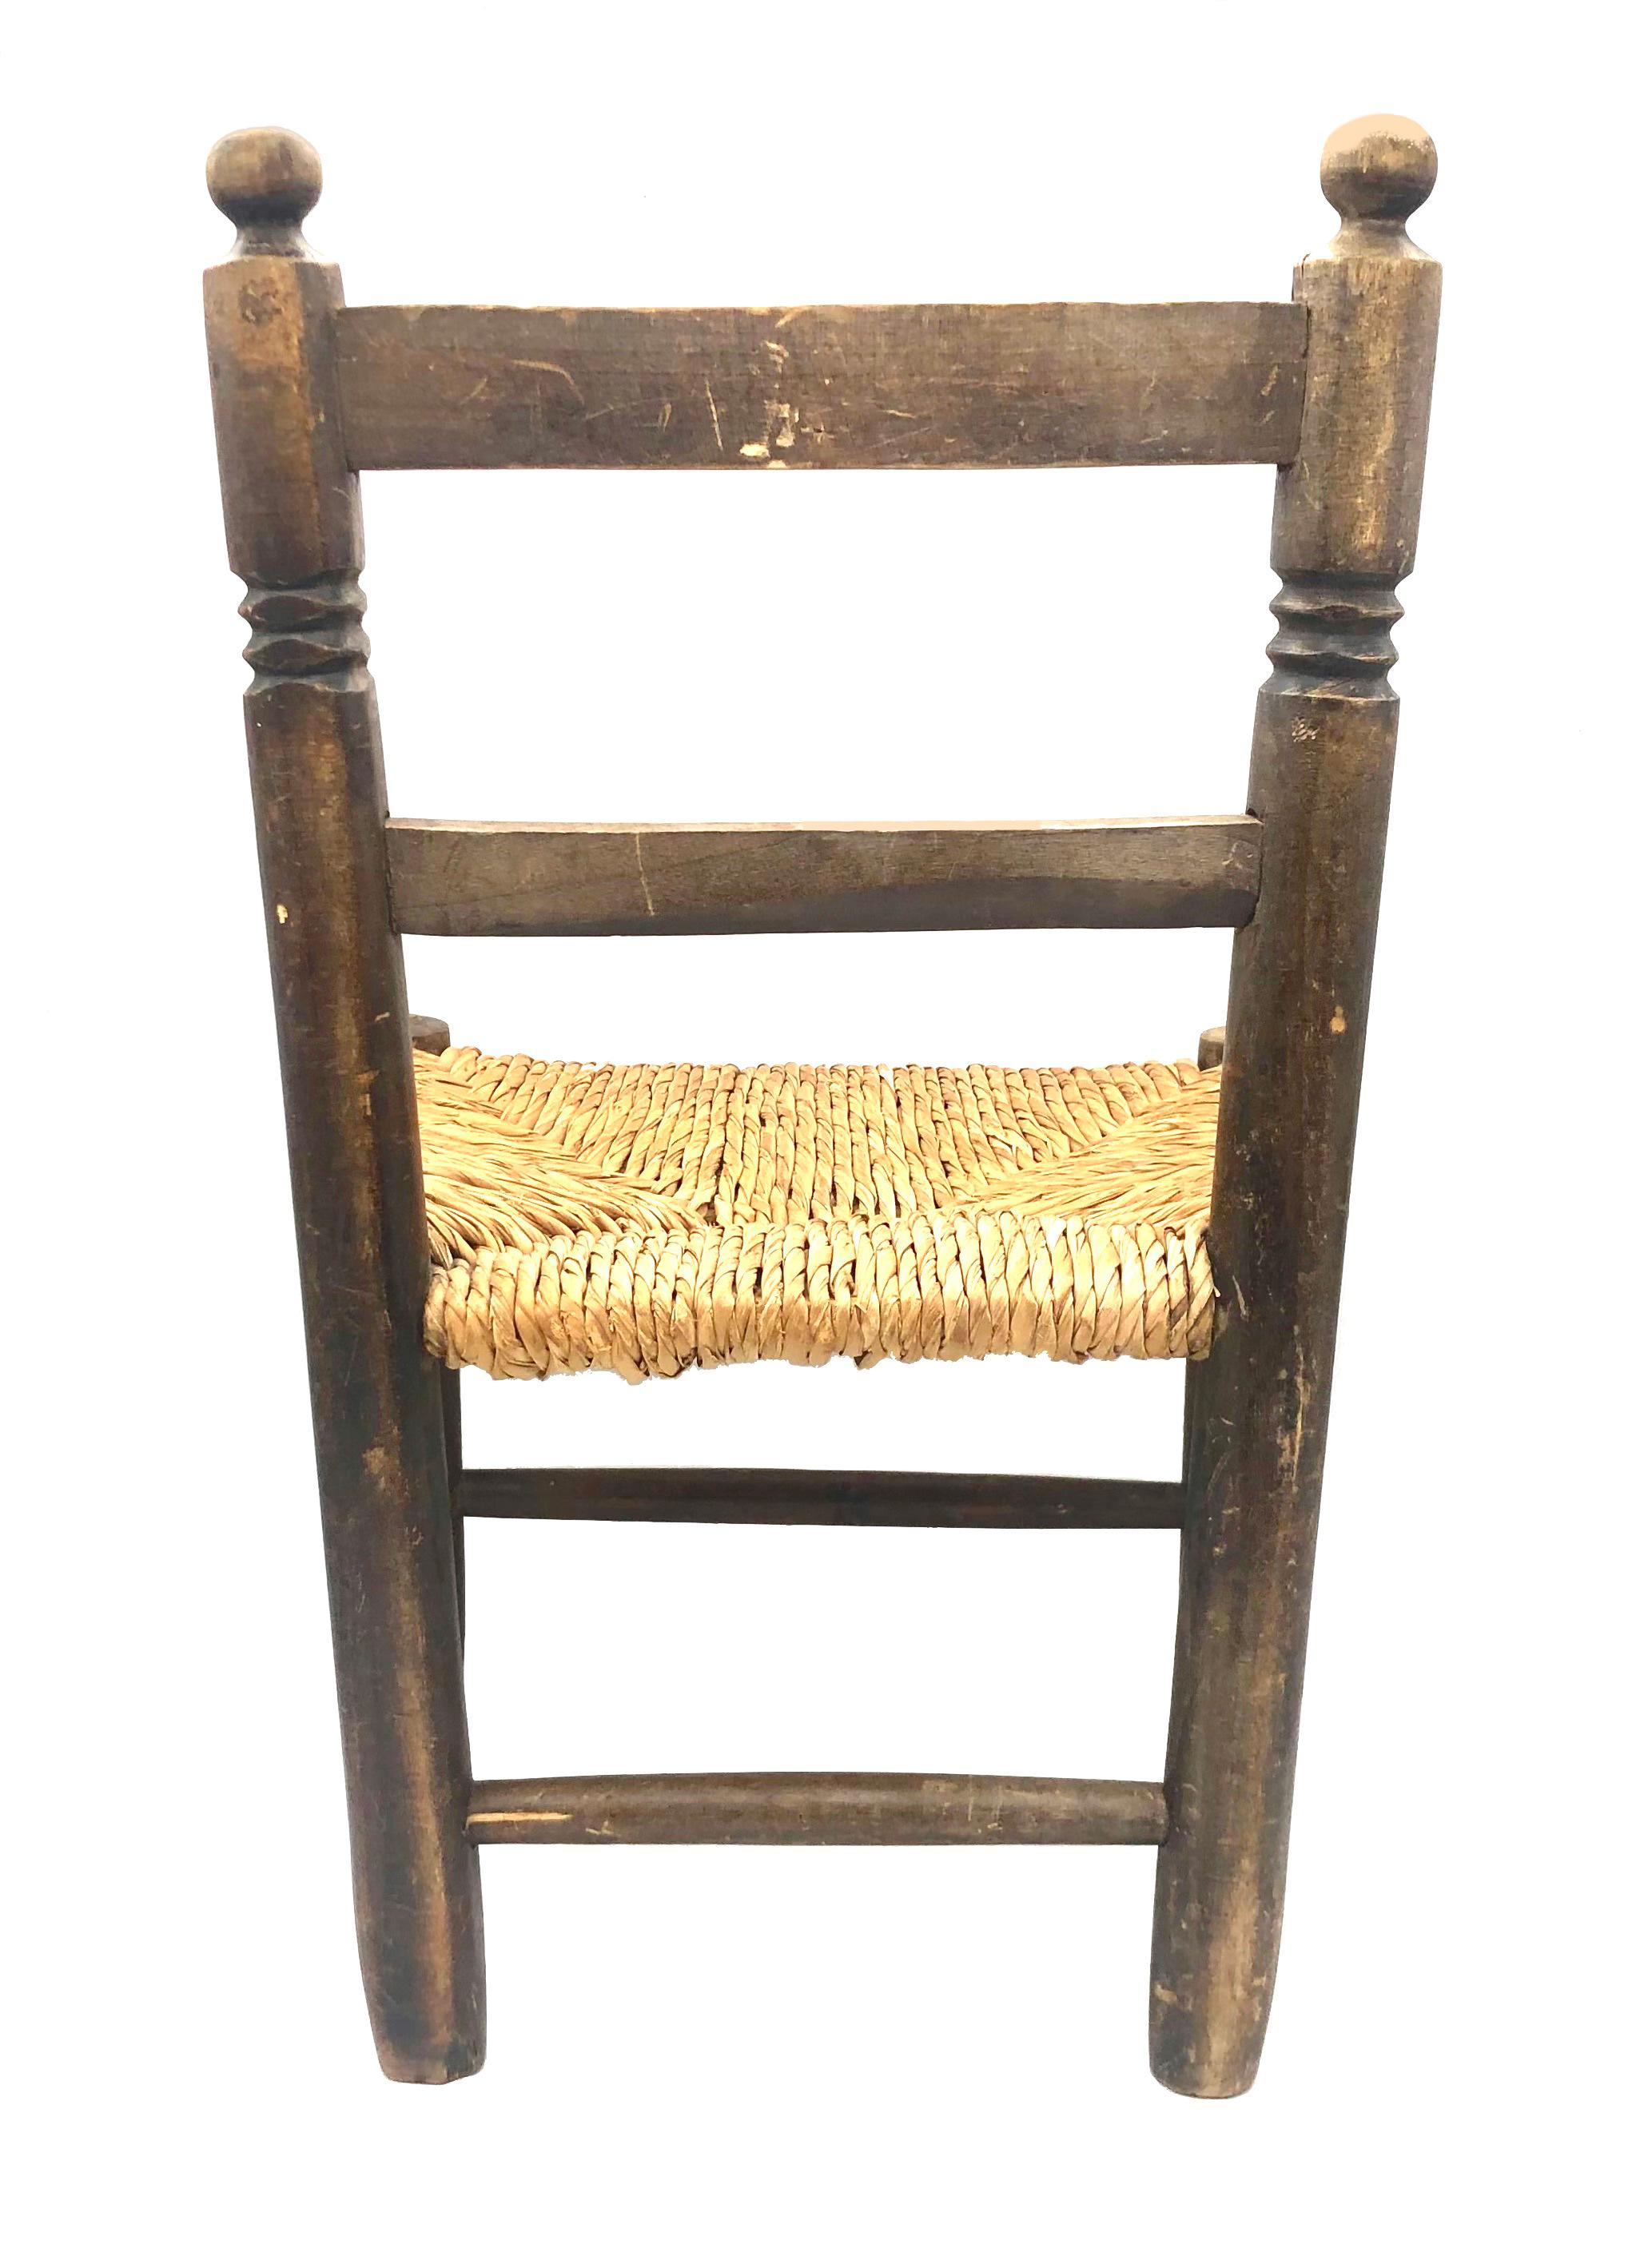 Country Antique 19th century Children's Armchair Carved Oak Wicker Seat For Sale